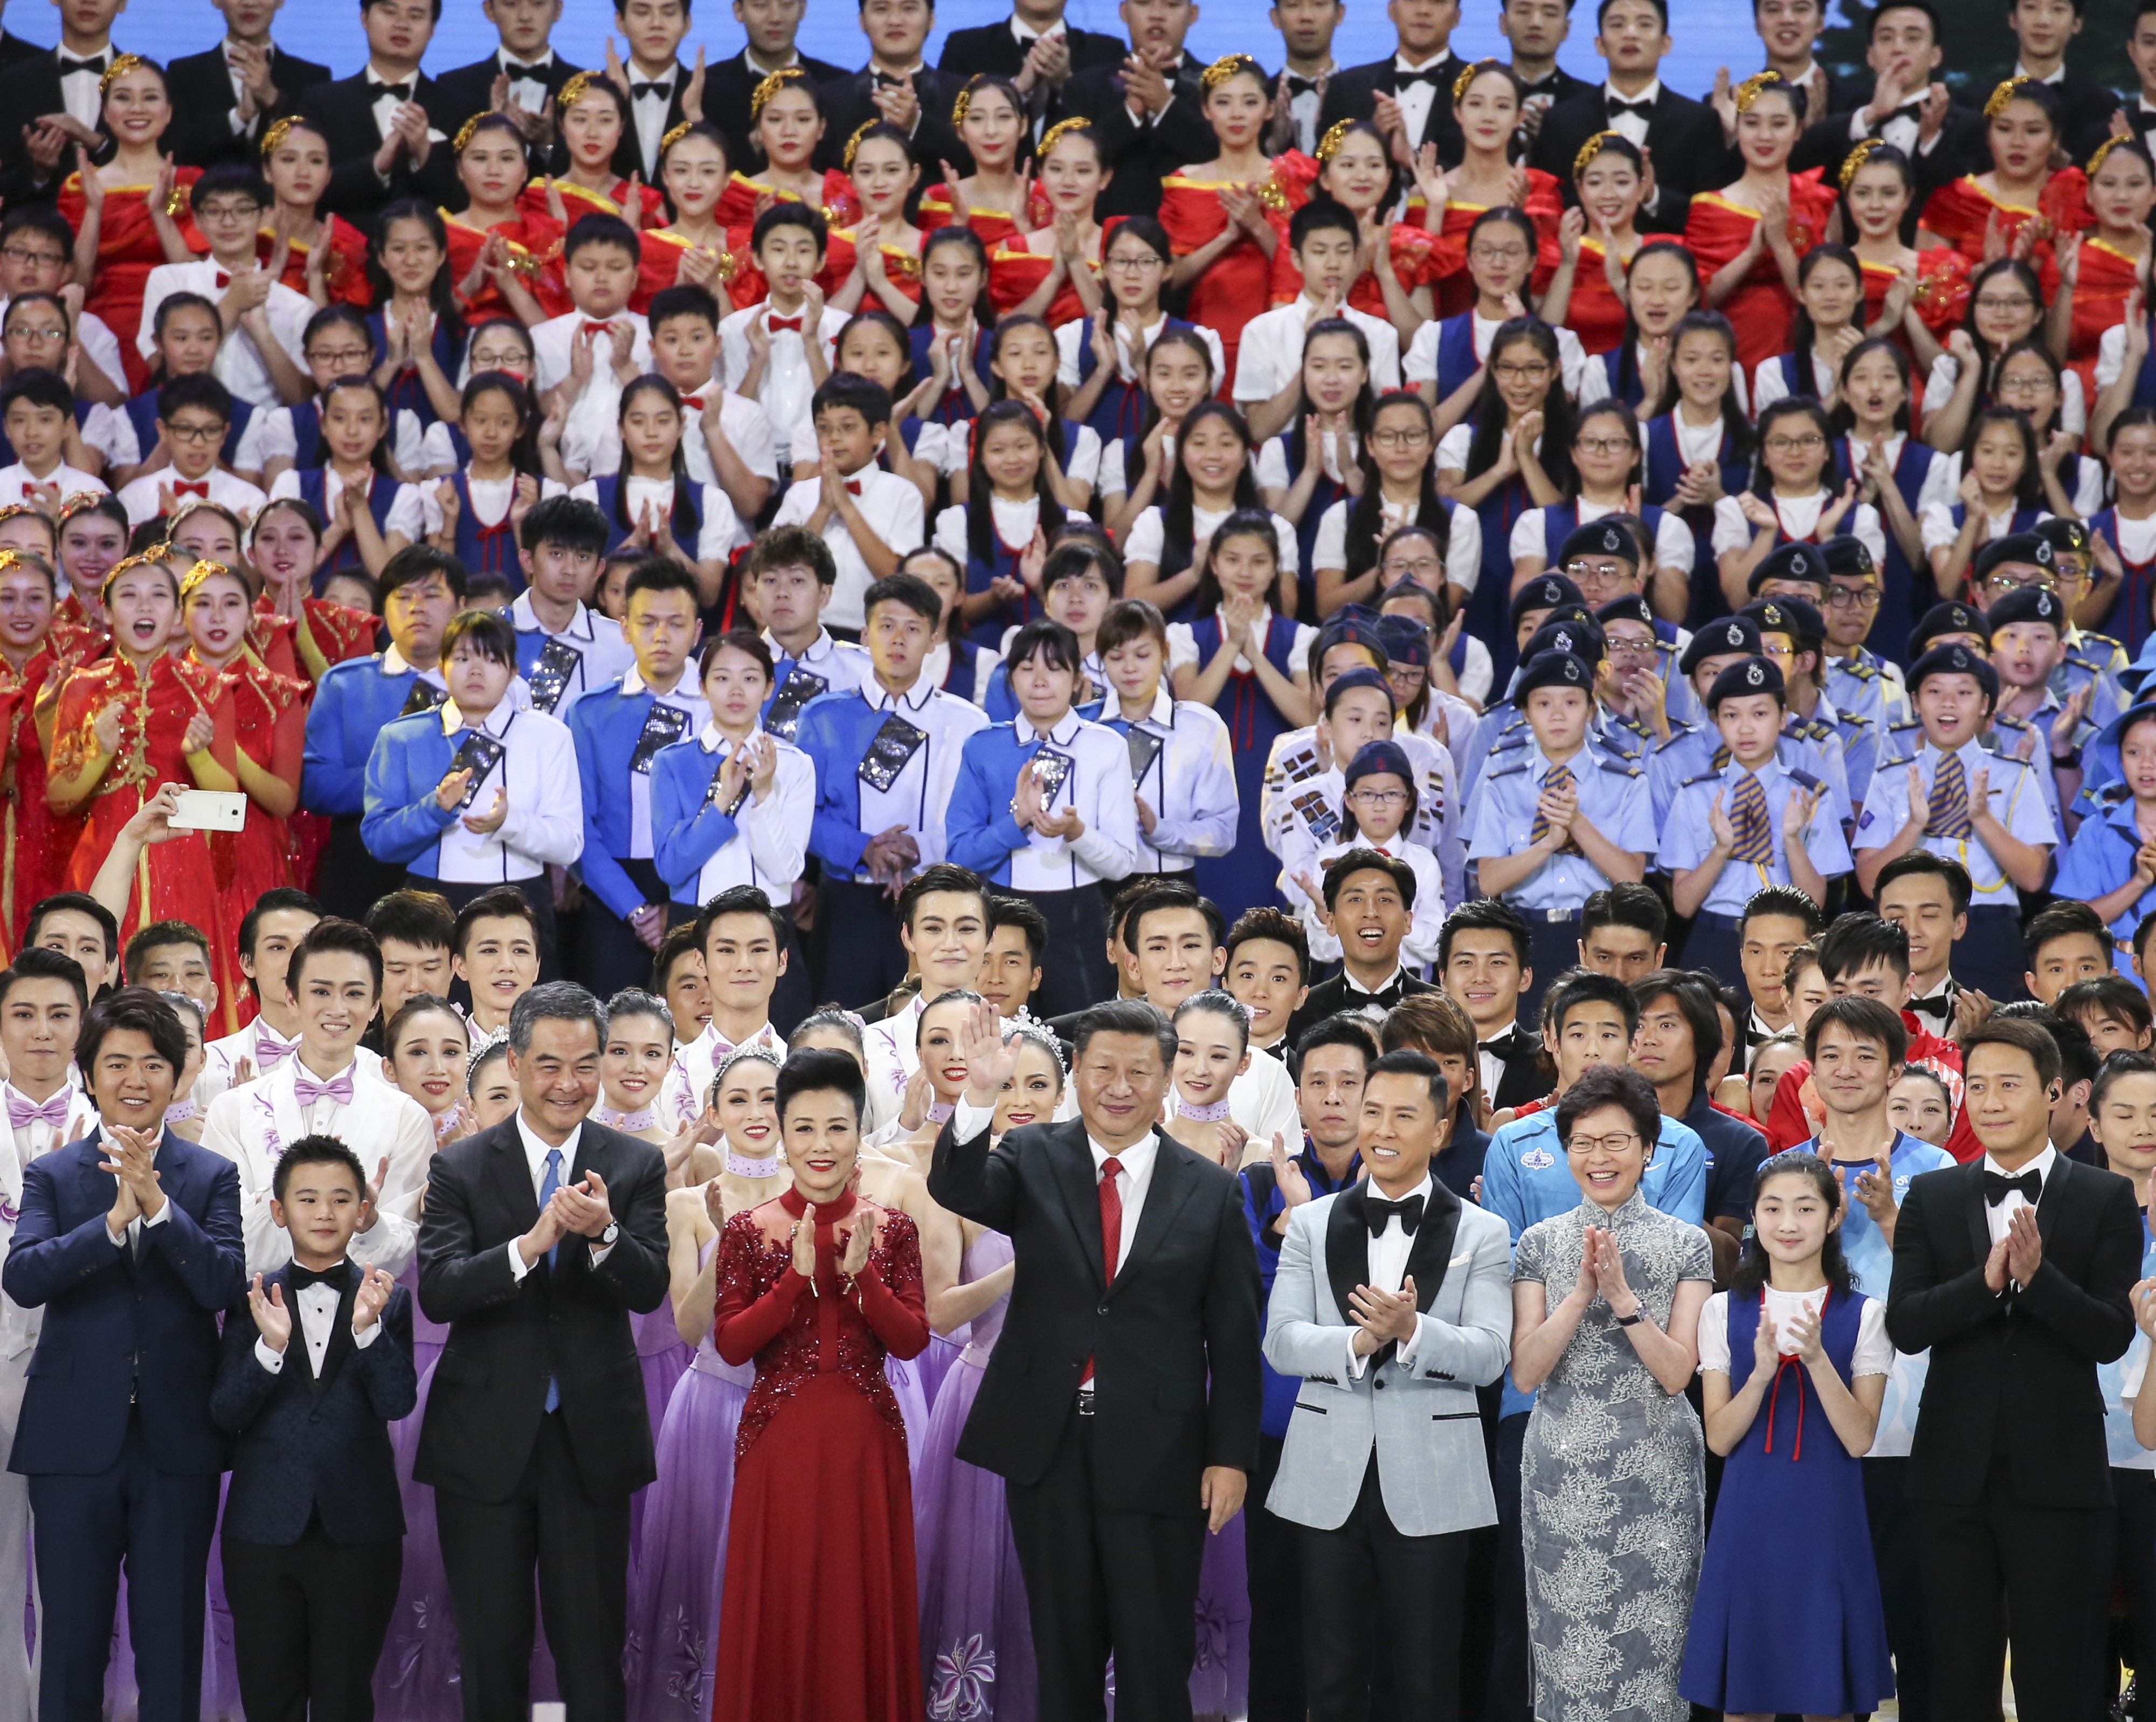 Chinese President Xi Jinping (centre) is all smiles on stage with Hong Kong Chief Executive Leung Chun-ying and his successor Carrie Lam, flanked by celebrities from the city and mainland. Photo: Dickson lee